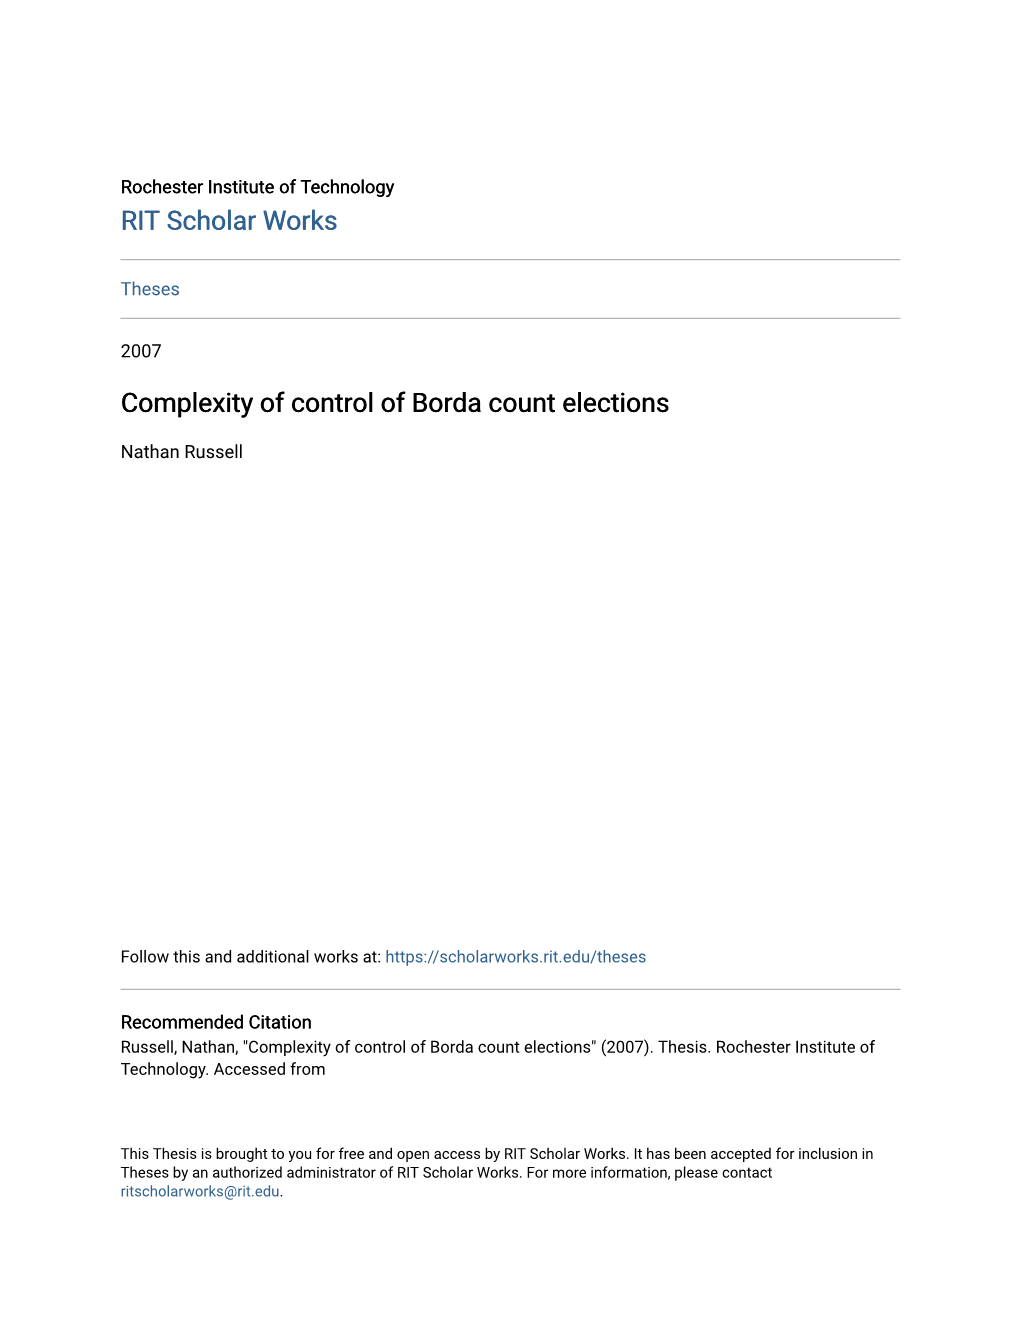 Complexity of Control of Borda Count Elections